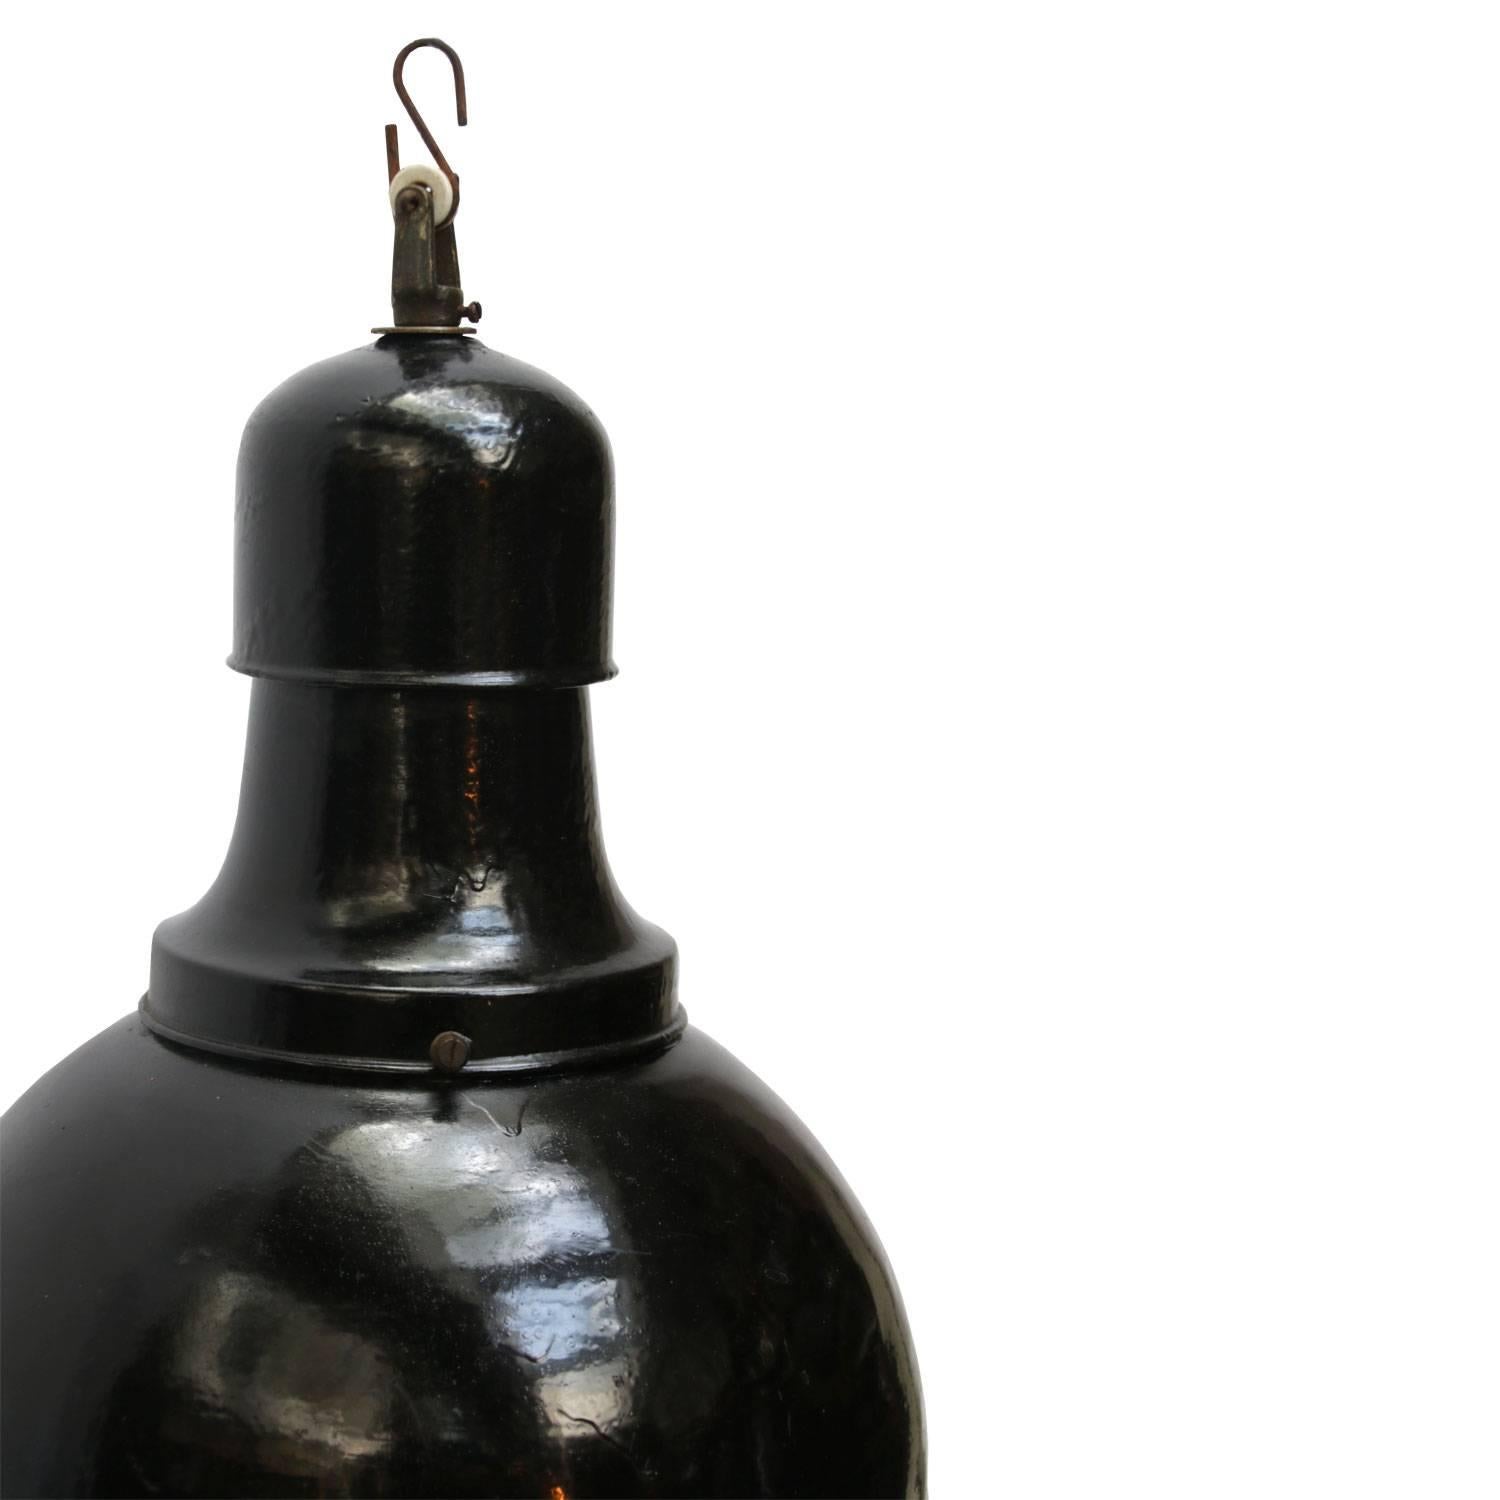 Industrial lamp. Black enamel shade. White interior cast iron top.

Weight: 2.2 kg / 4.9 lb

All lamps have been made suitable by international standards for incandescent light bulbs, energy-efficient and LED bulbs. E26/E27 bulb holders and new